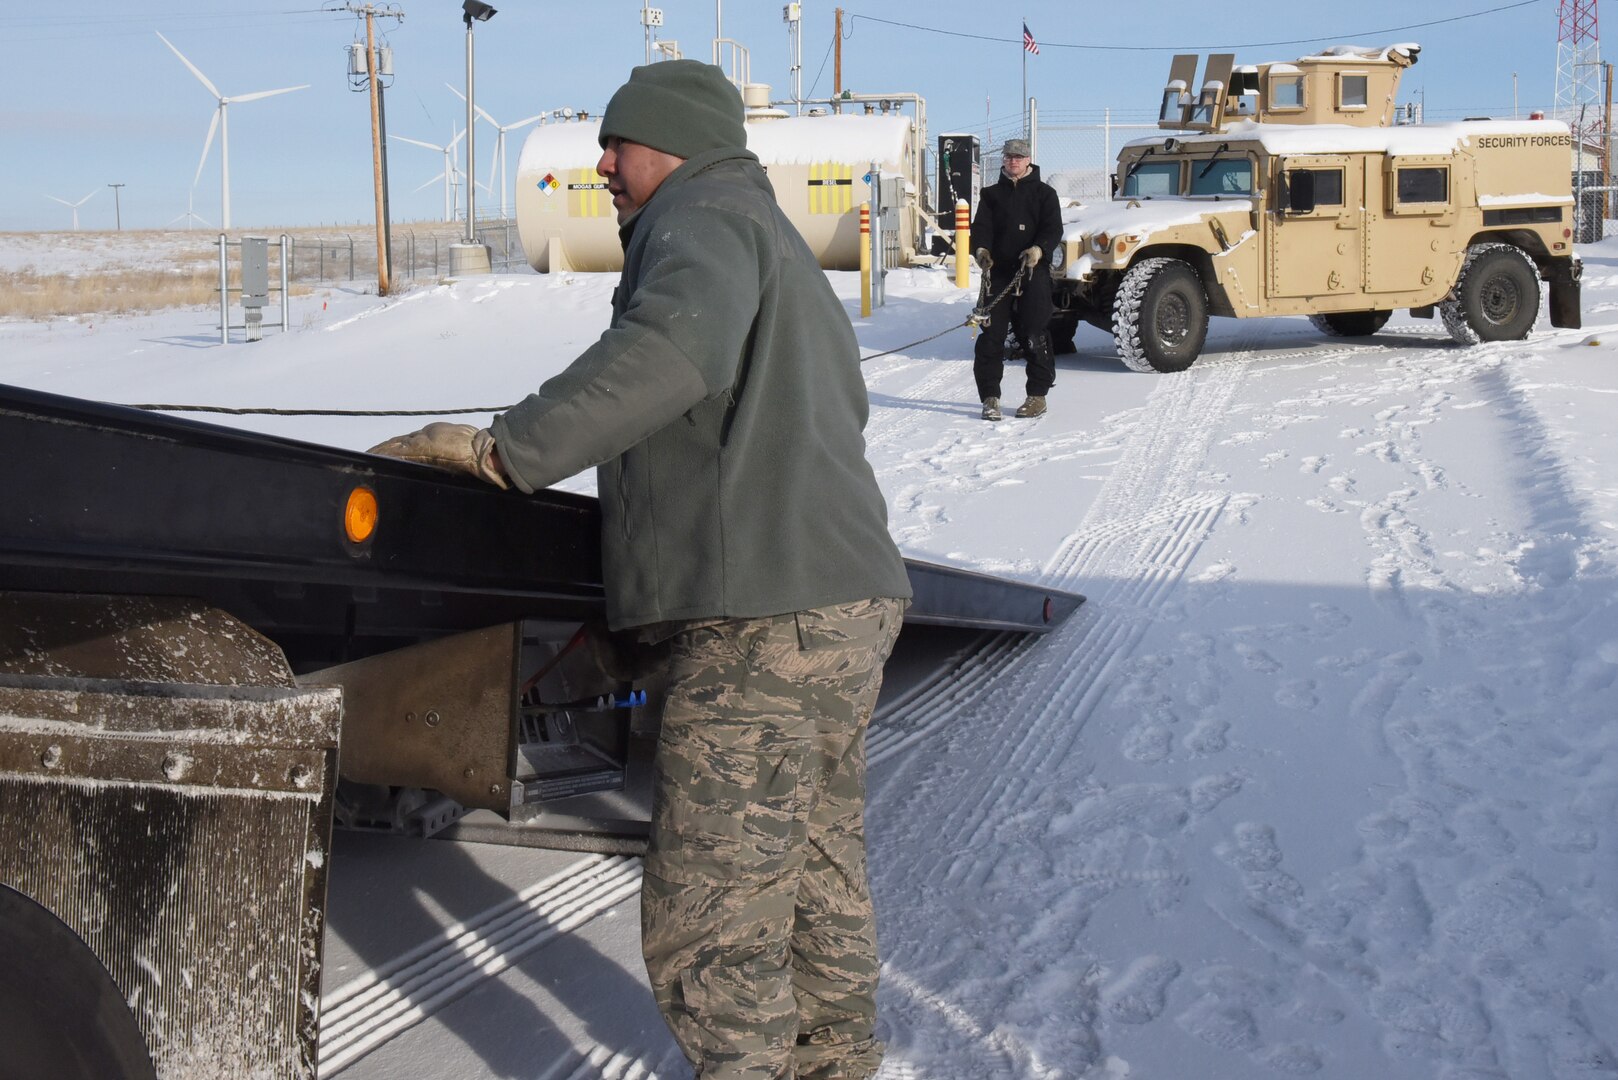 Senior Airmen Leonard Montoya, left, and Ian Lauzon, both 341st Logistics Readiness Squadron vehicle operators, prepare to move a Humvee onto the back of a tow truck at a missile alert facility which will later be transferred to Malmstrom Air Force Base, Mont., for maintenance Feb. 7,2017.  (U.S. Air Force photo/Jason Heavner)